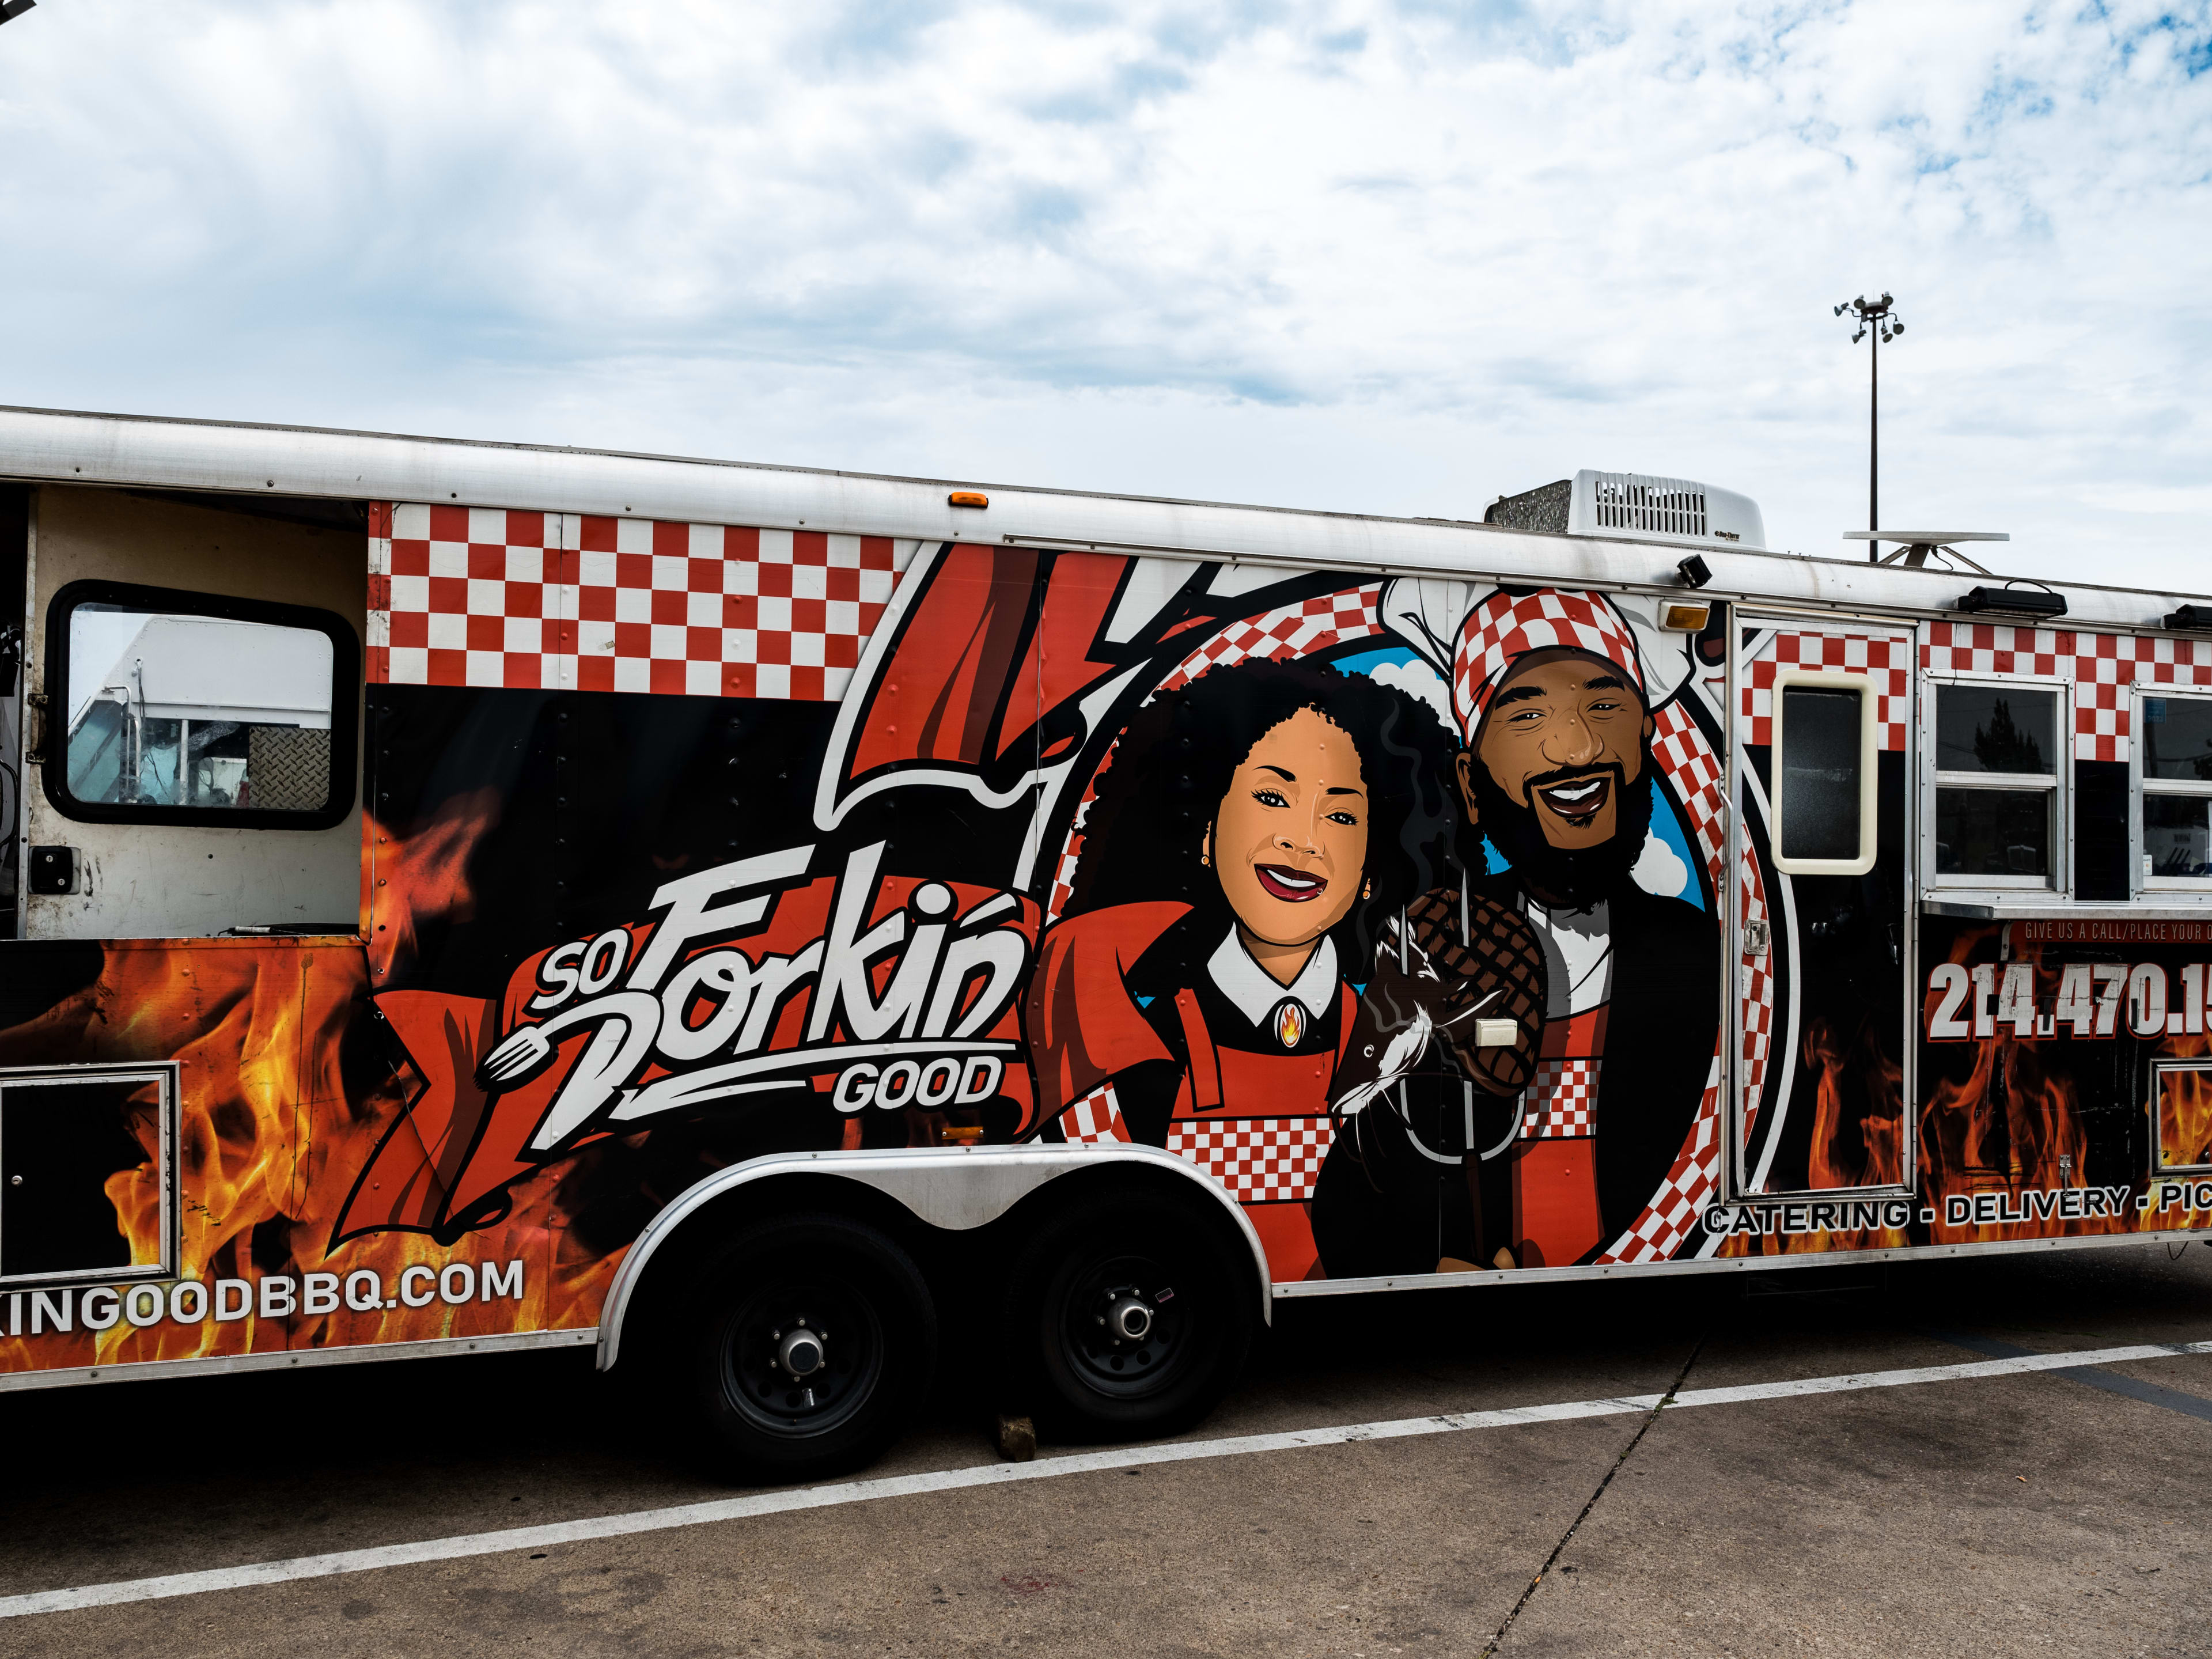 The So Forkin' Good BBQ Truck in Fort Worth